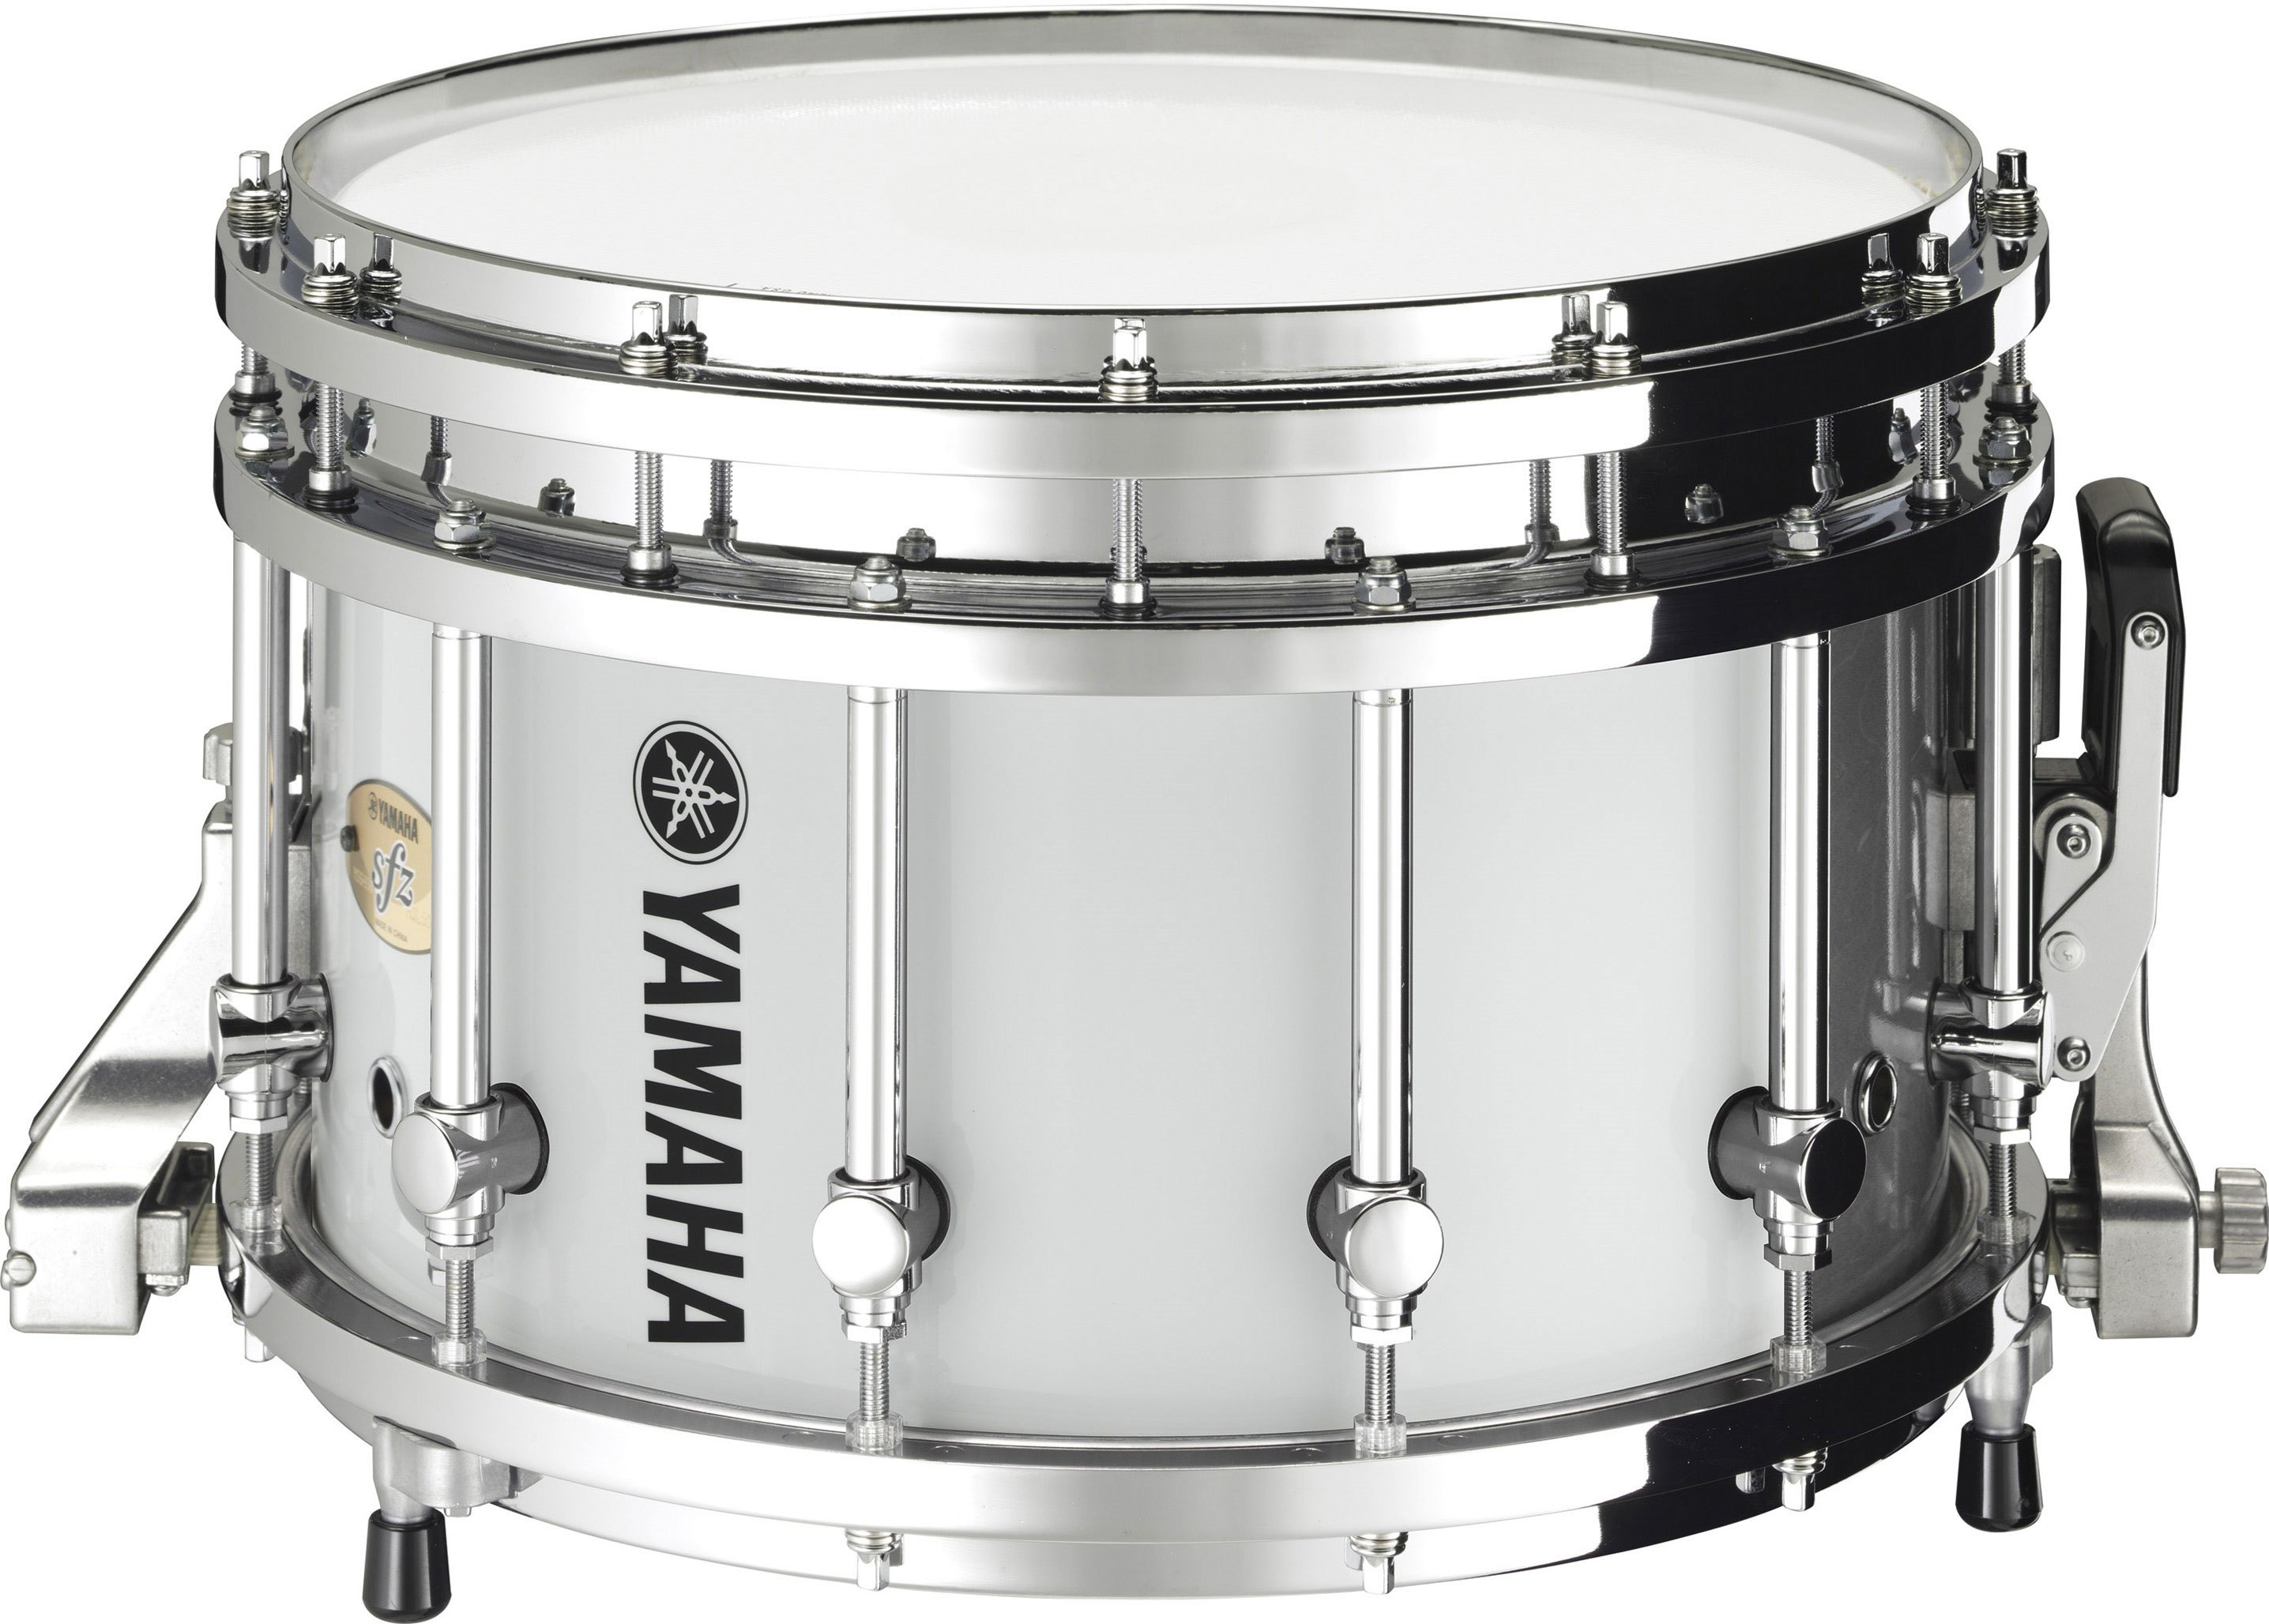 MSS-9300 SFZ™ Series - Features - Marching Drums - Marching 